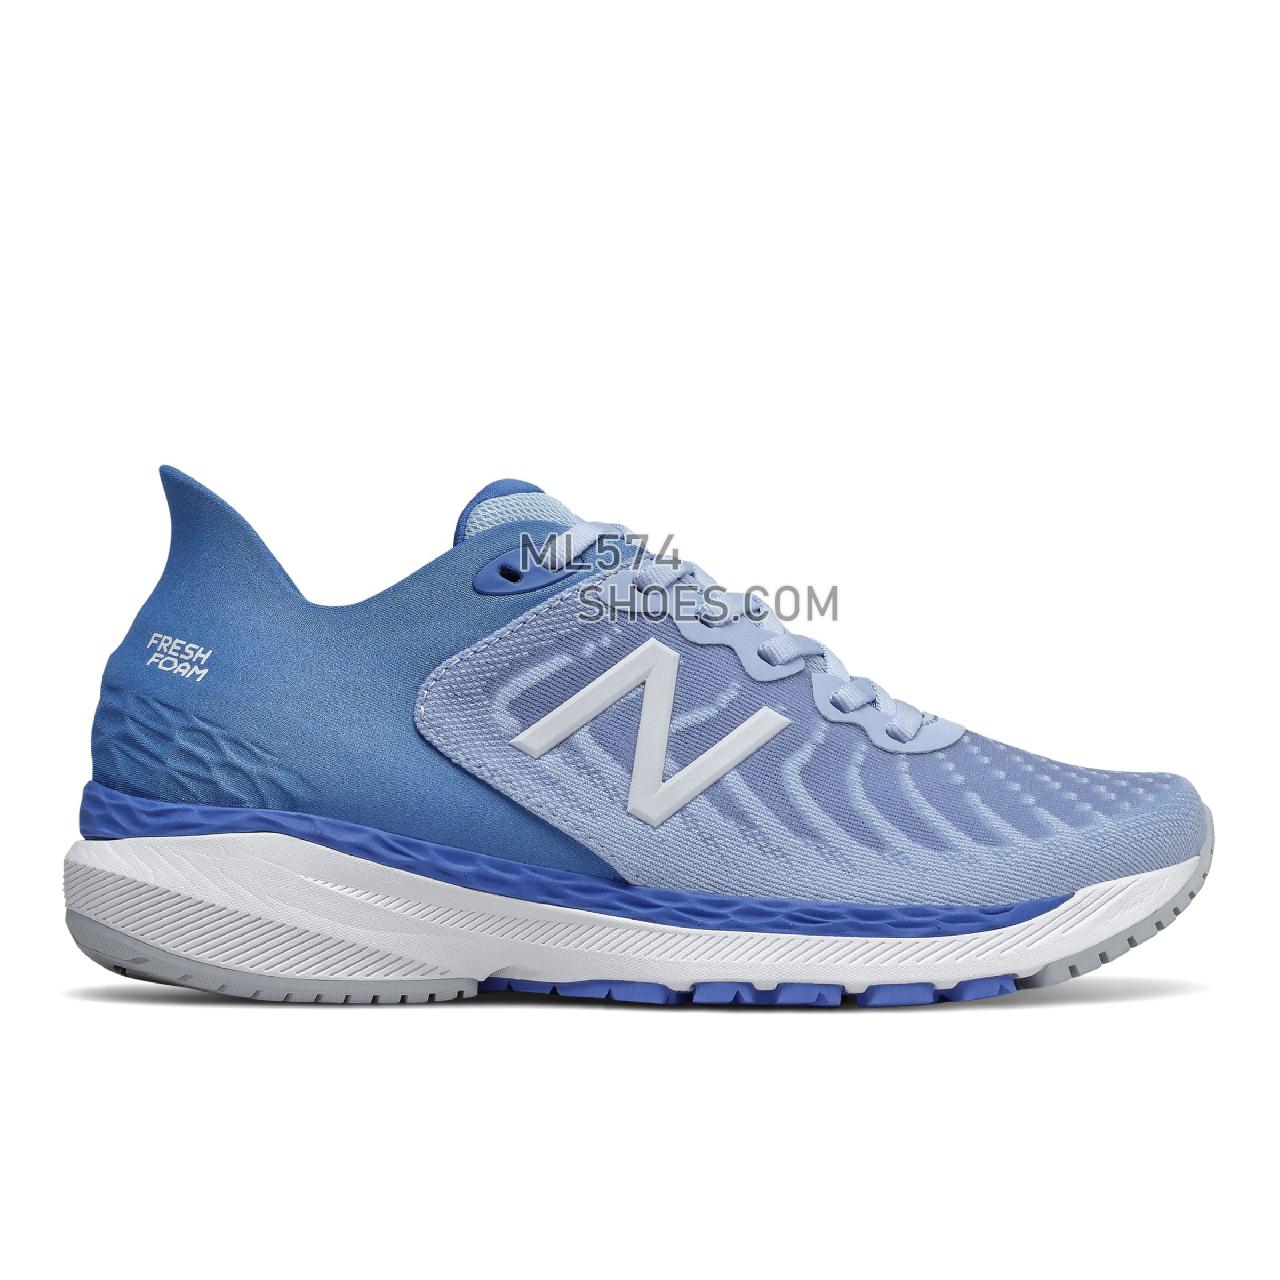 New Balance Fresh Foam 860v11 - Women's Stability Running - Frost with Faded Cobalt - W860A11